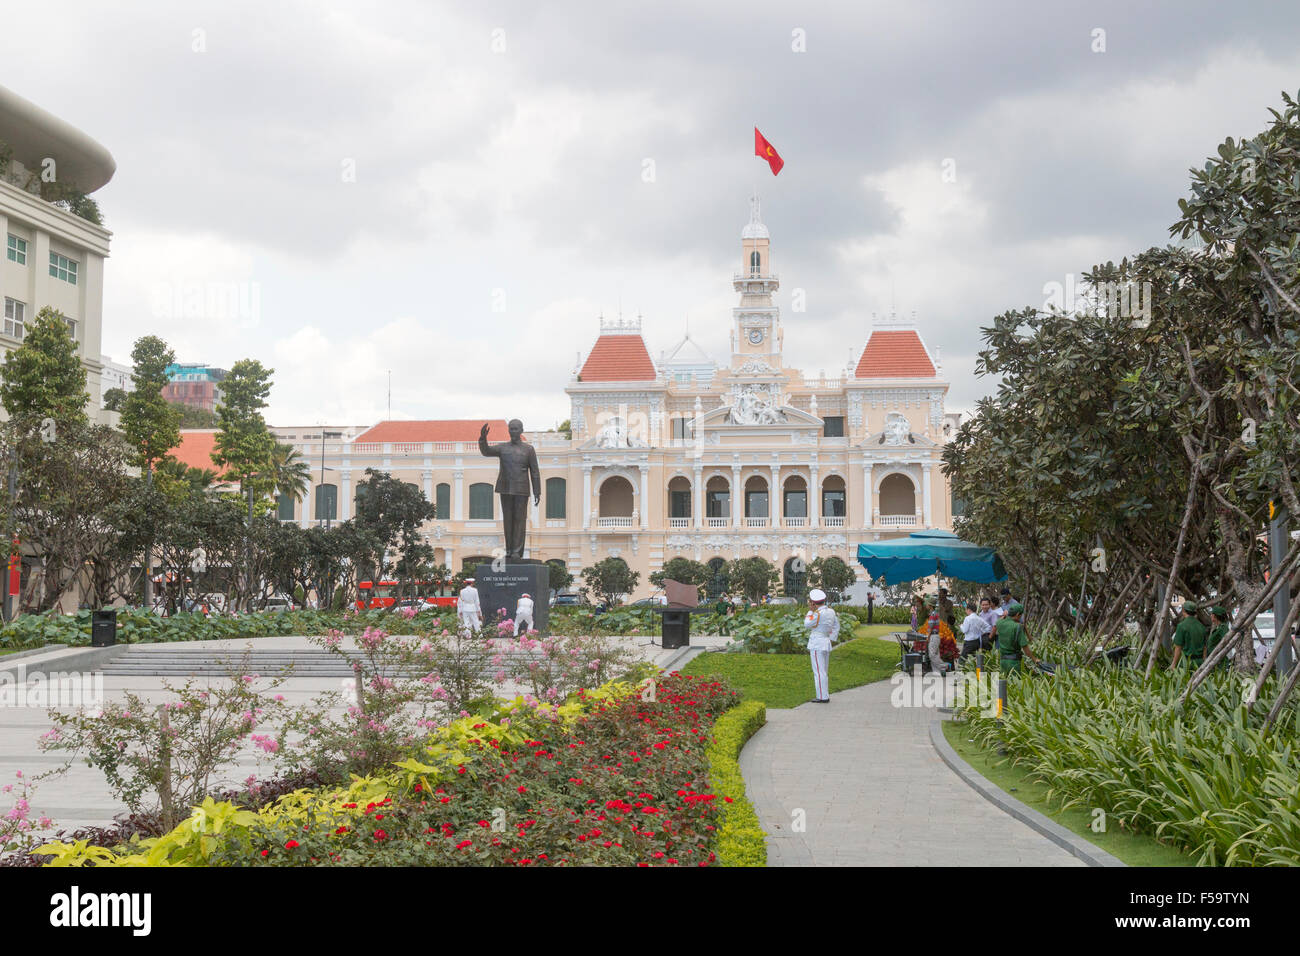 Ho Chi Minh city hall or Hotel de Ville de saigon or People's committee building in Ho chi Minh with statue of namesake,Vietnam Stock Photo